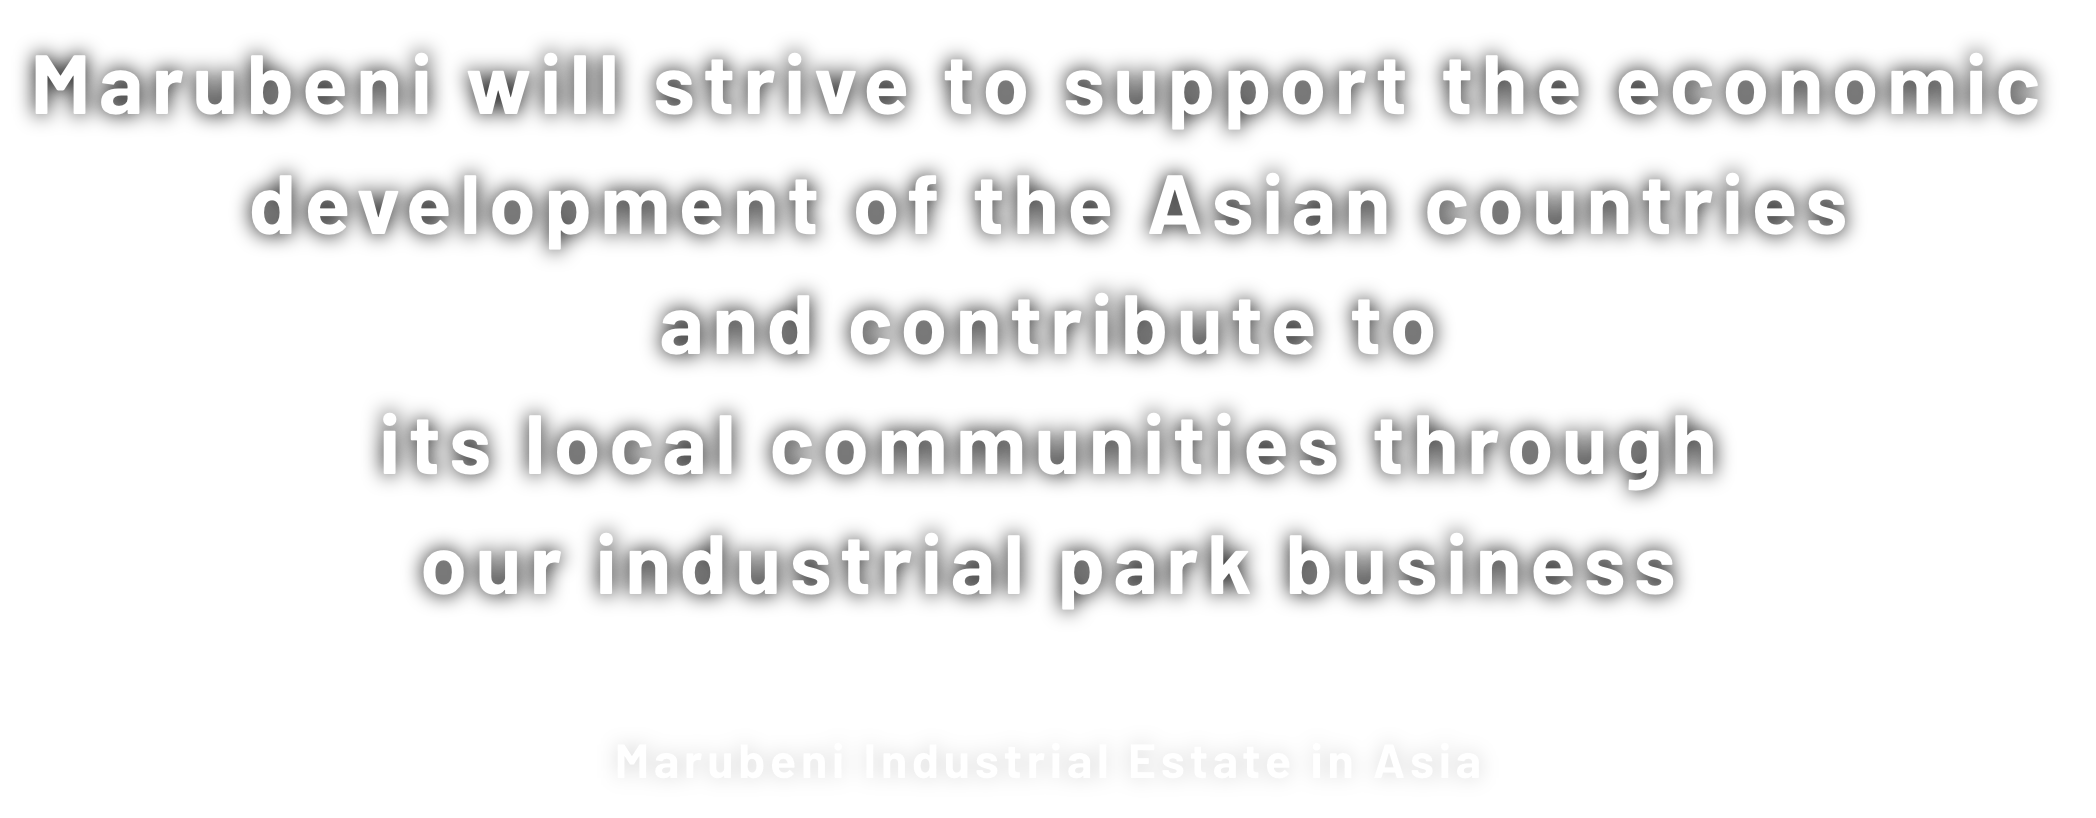 Marubeni will strive to support the economic development of the Asian countries and contribute to its local communities through our industrial park business Marubeni Industrial Estate in Asia